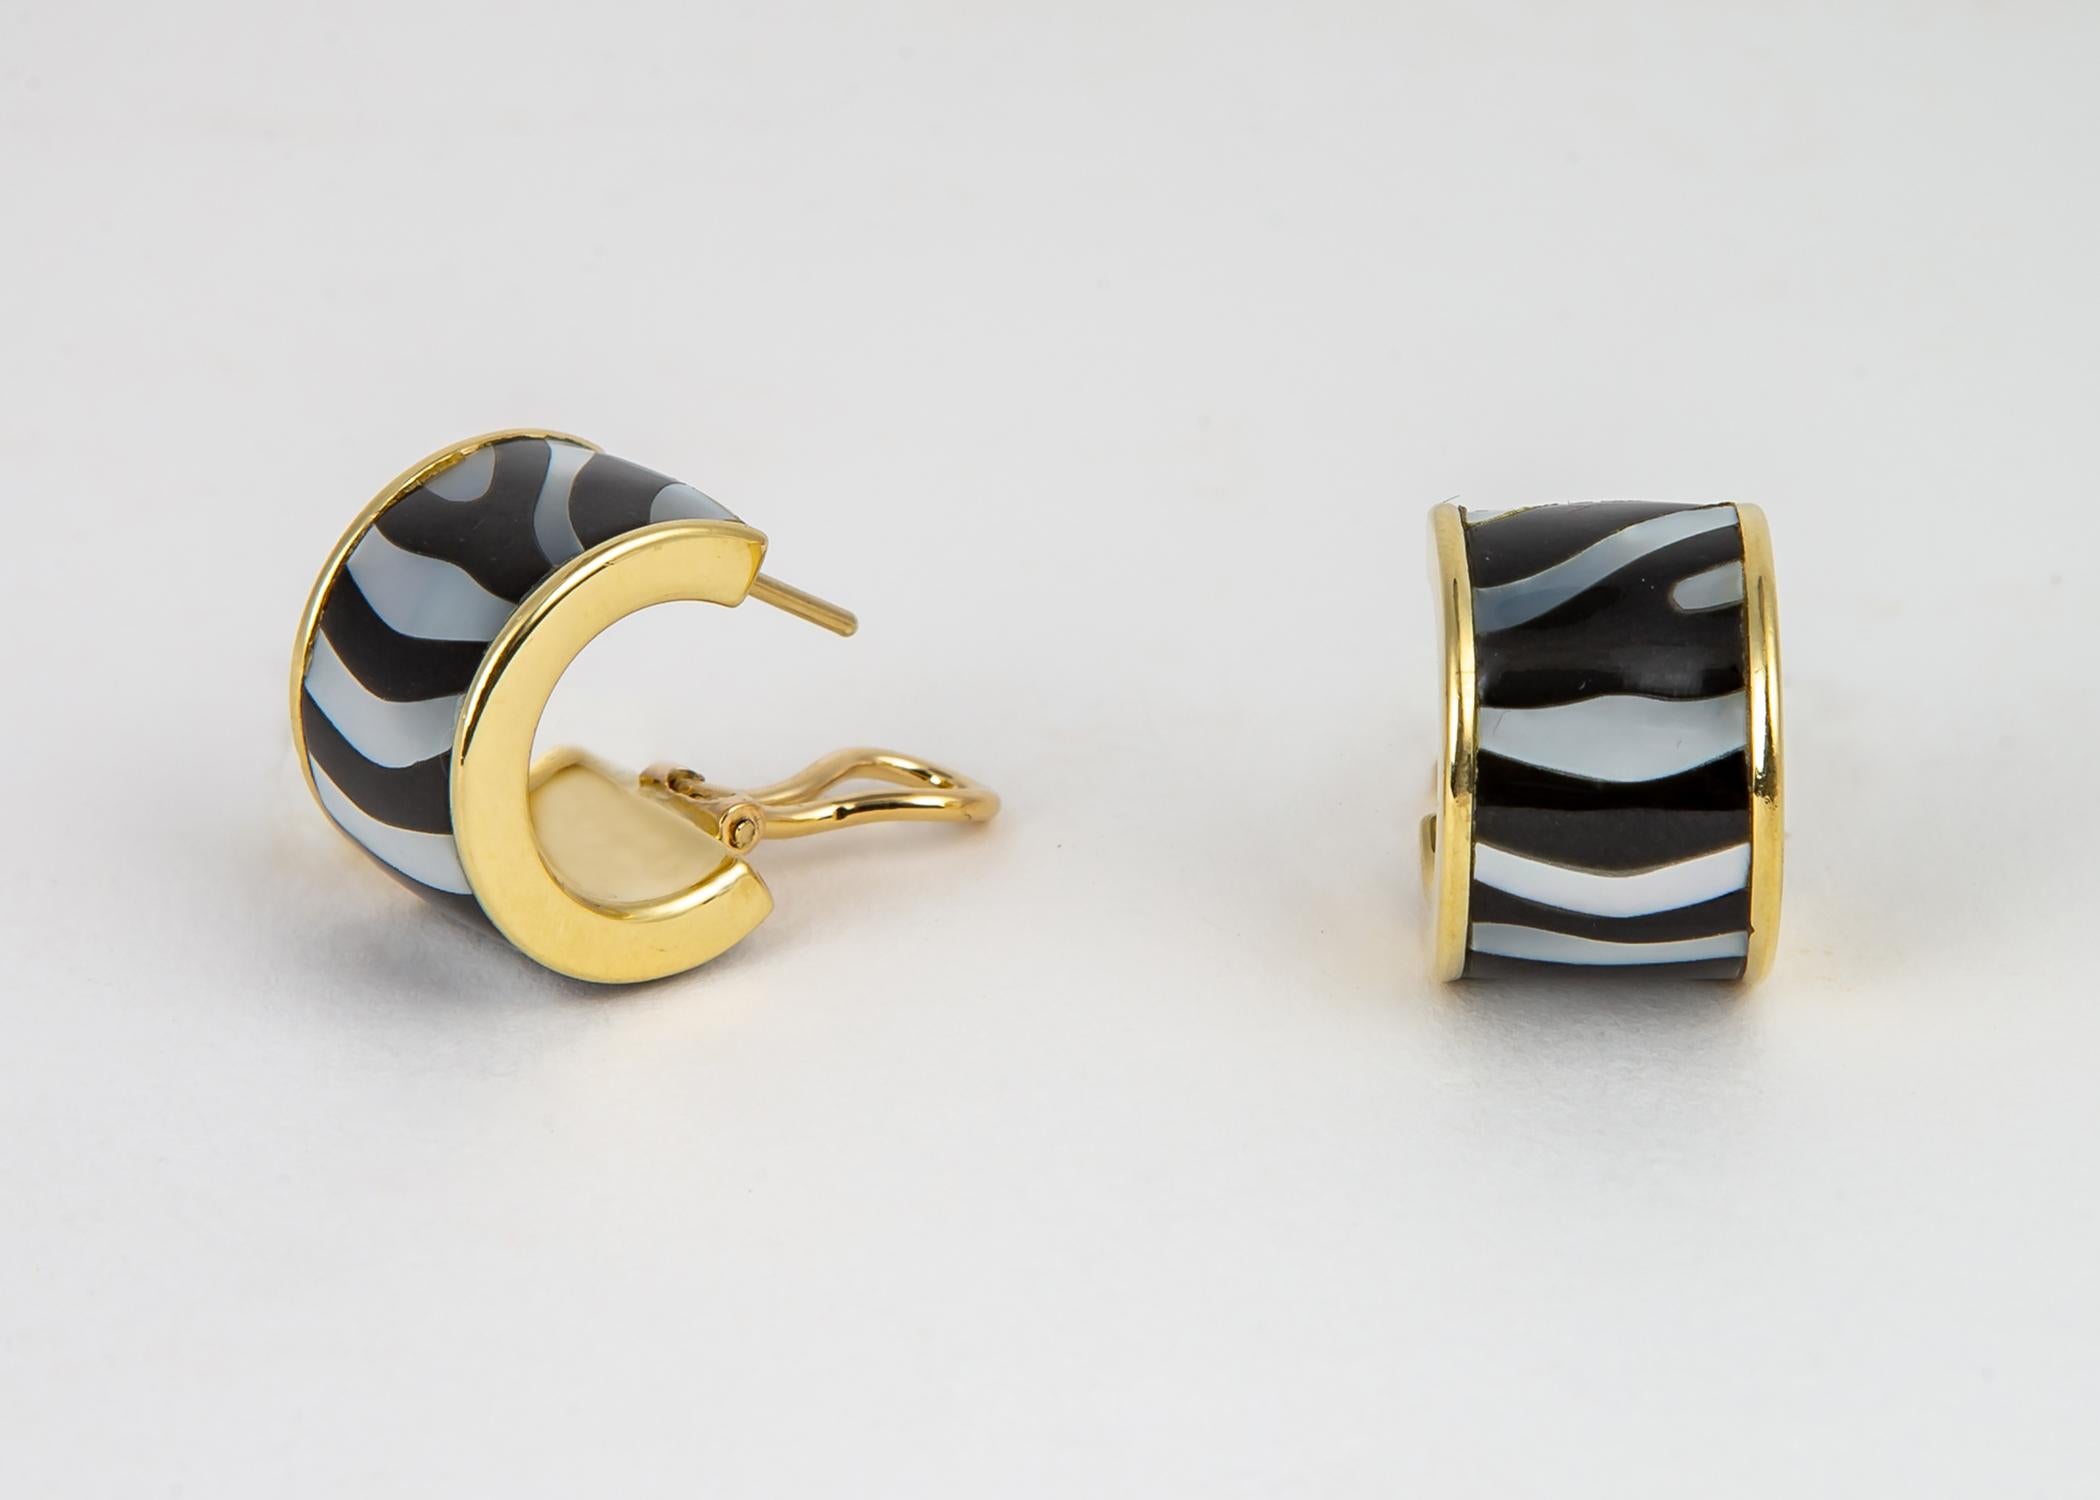 Tiffany & Co. creates a playful zebra stripped pattern combining black jade and beautiful mother of pearl. This could be an every day go to earring. 3/4's of an inch.